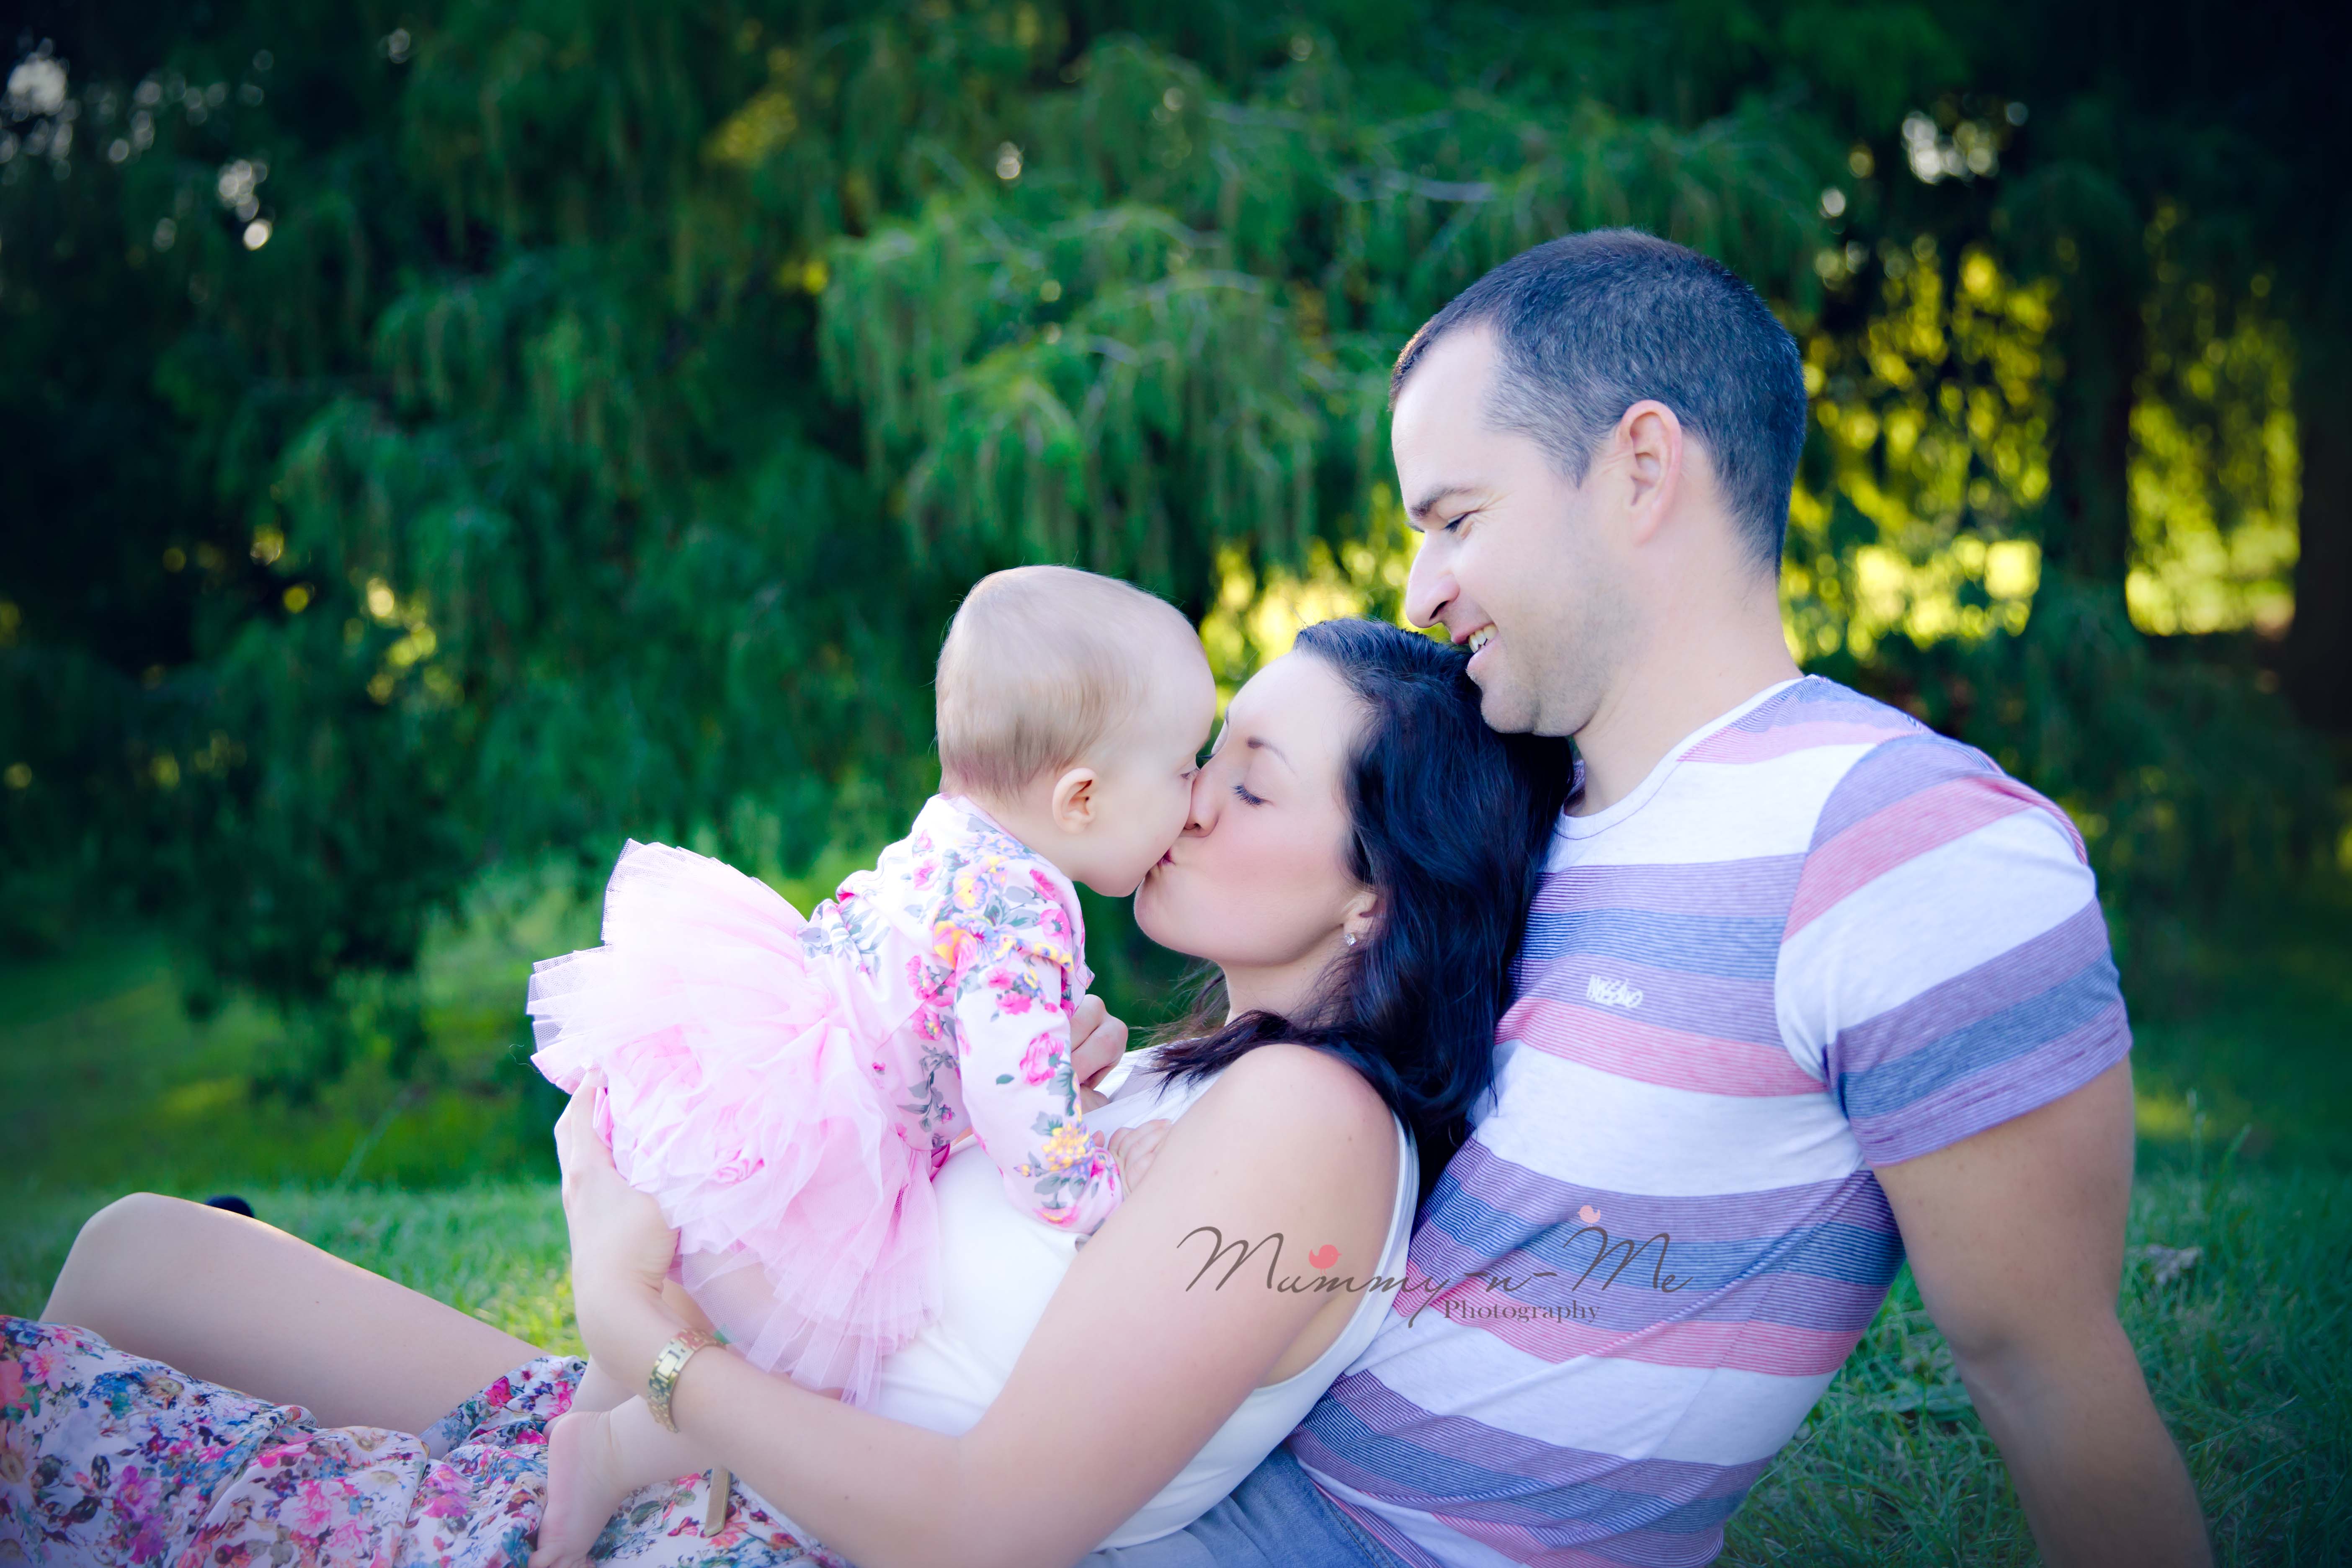 8 month girl with family giving open mouth kisses at the park brisbane family child baby photographer